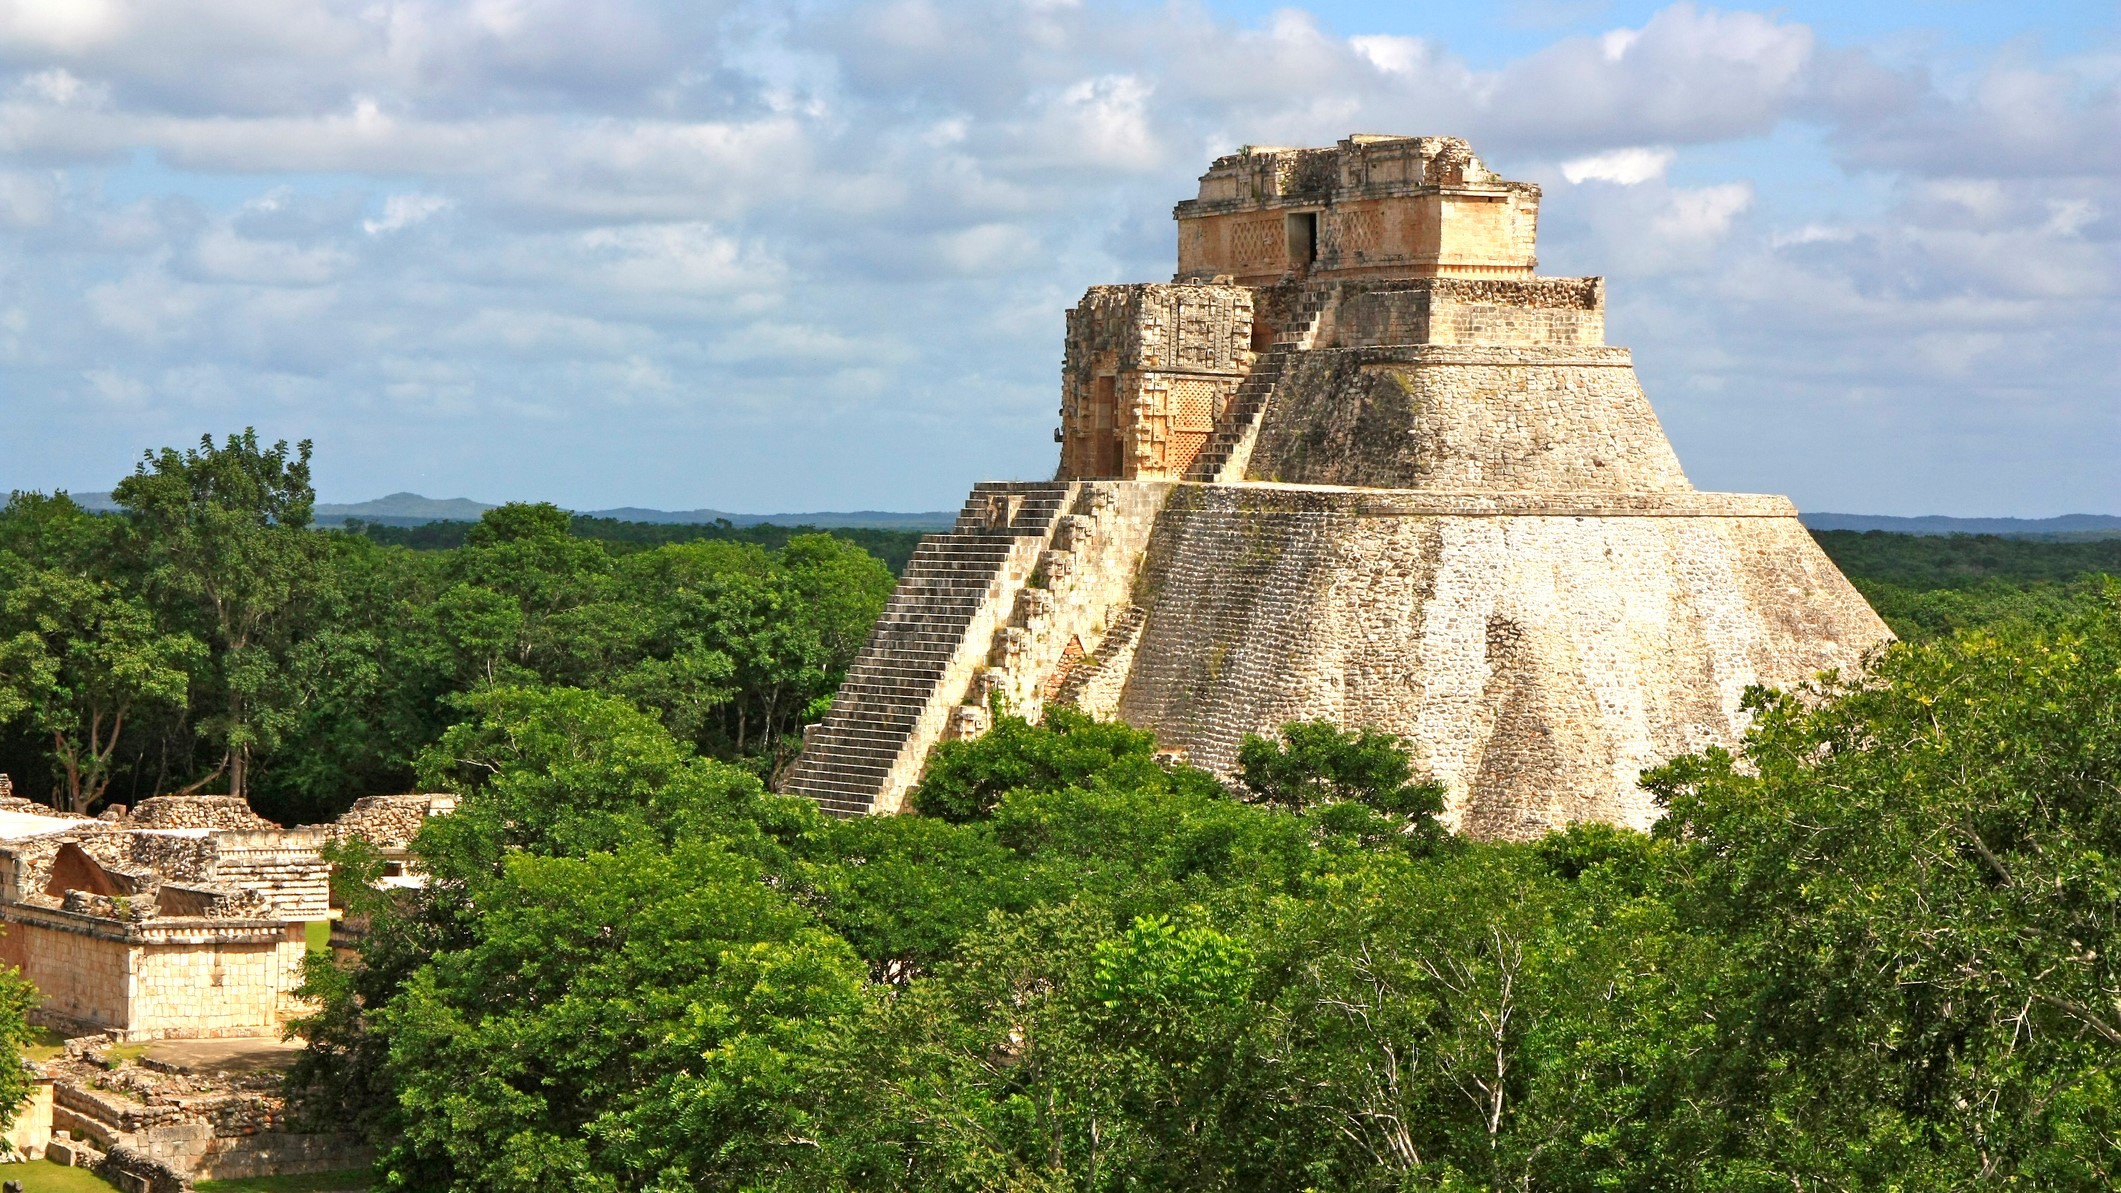 a large pyramid structure with a large staircase, rises high above the dense tree canopy below.